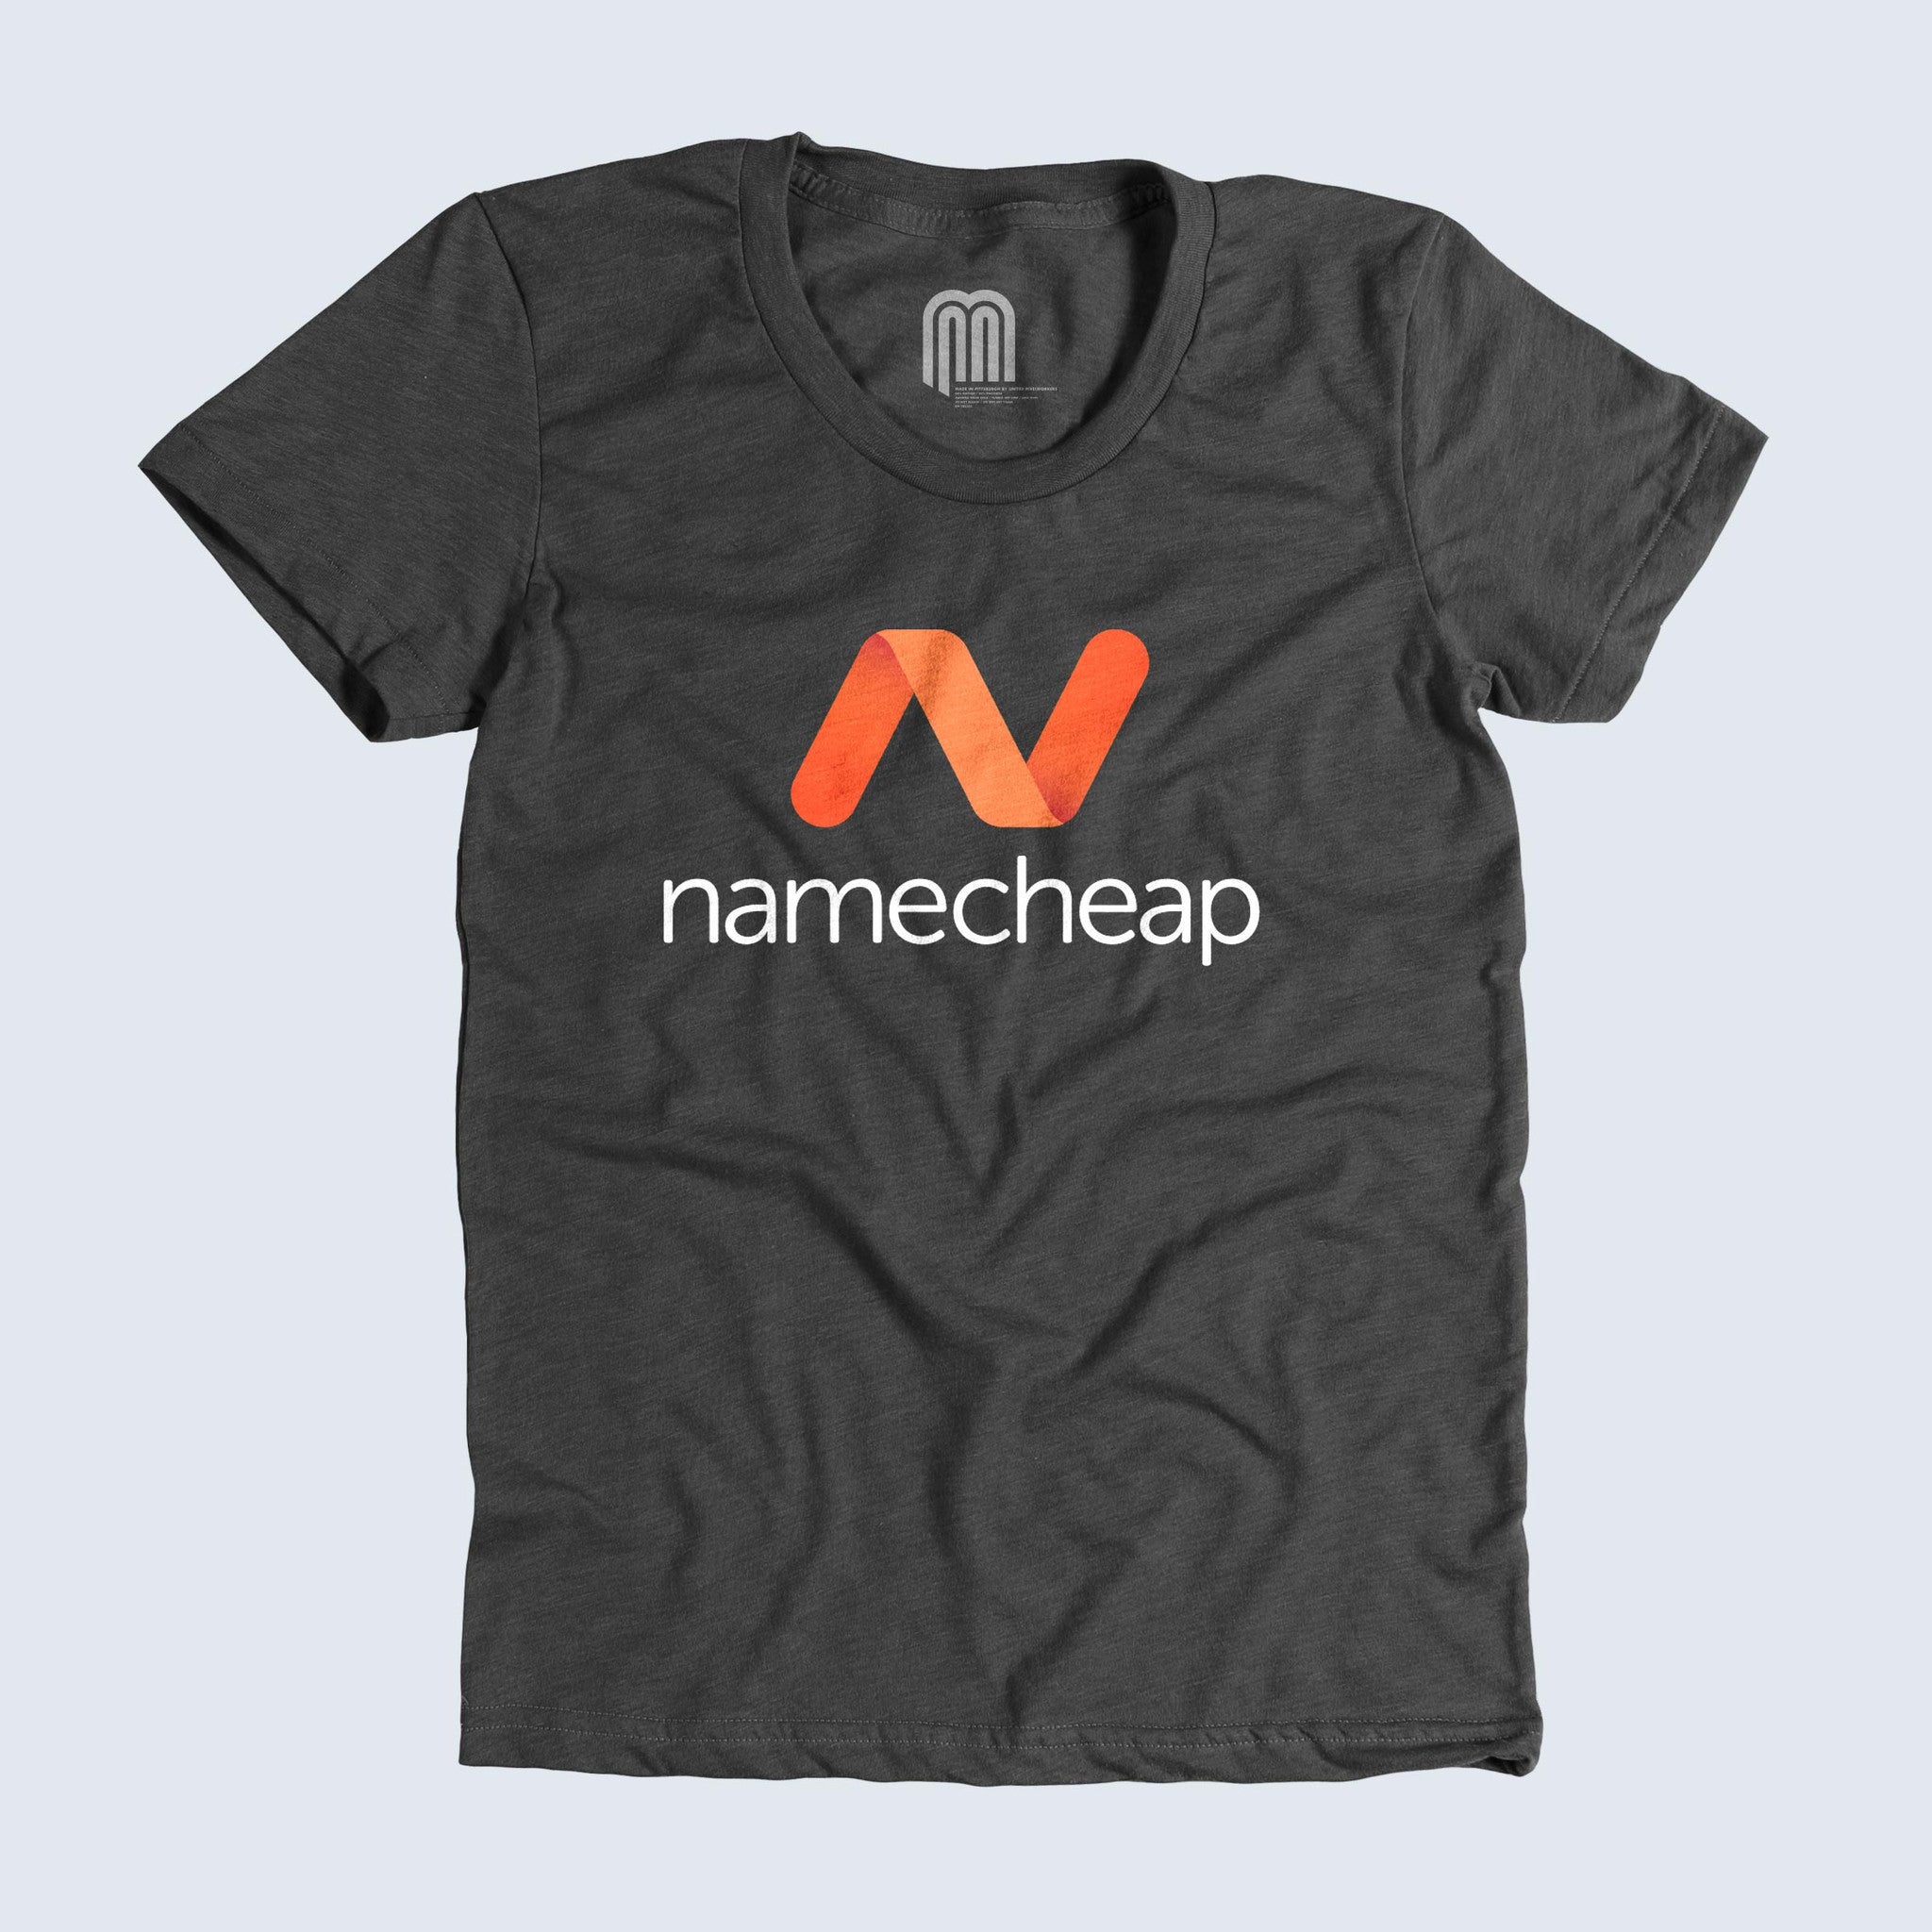 Best Selling Shopify Products on merch.namecheap.com-2